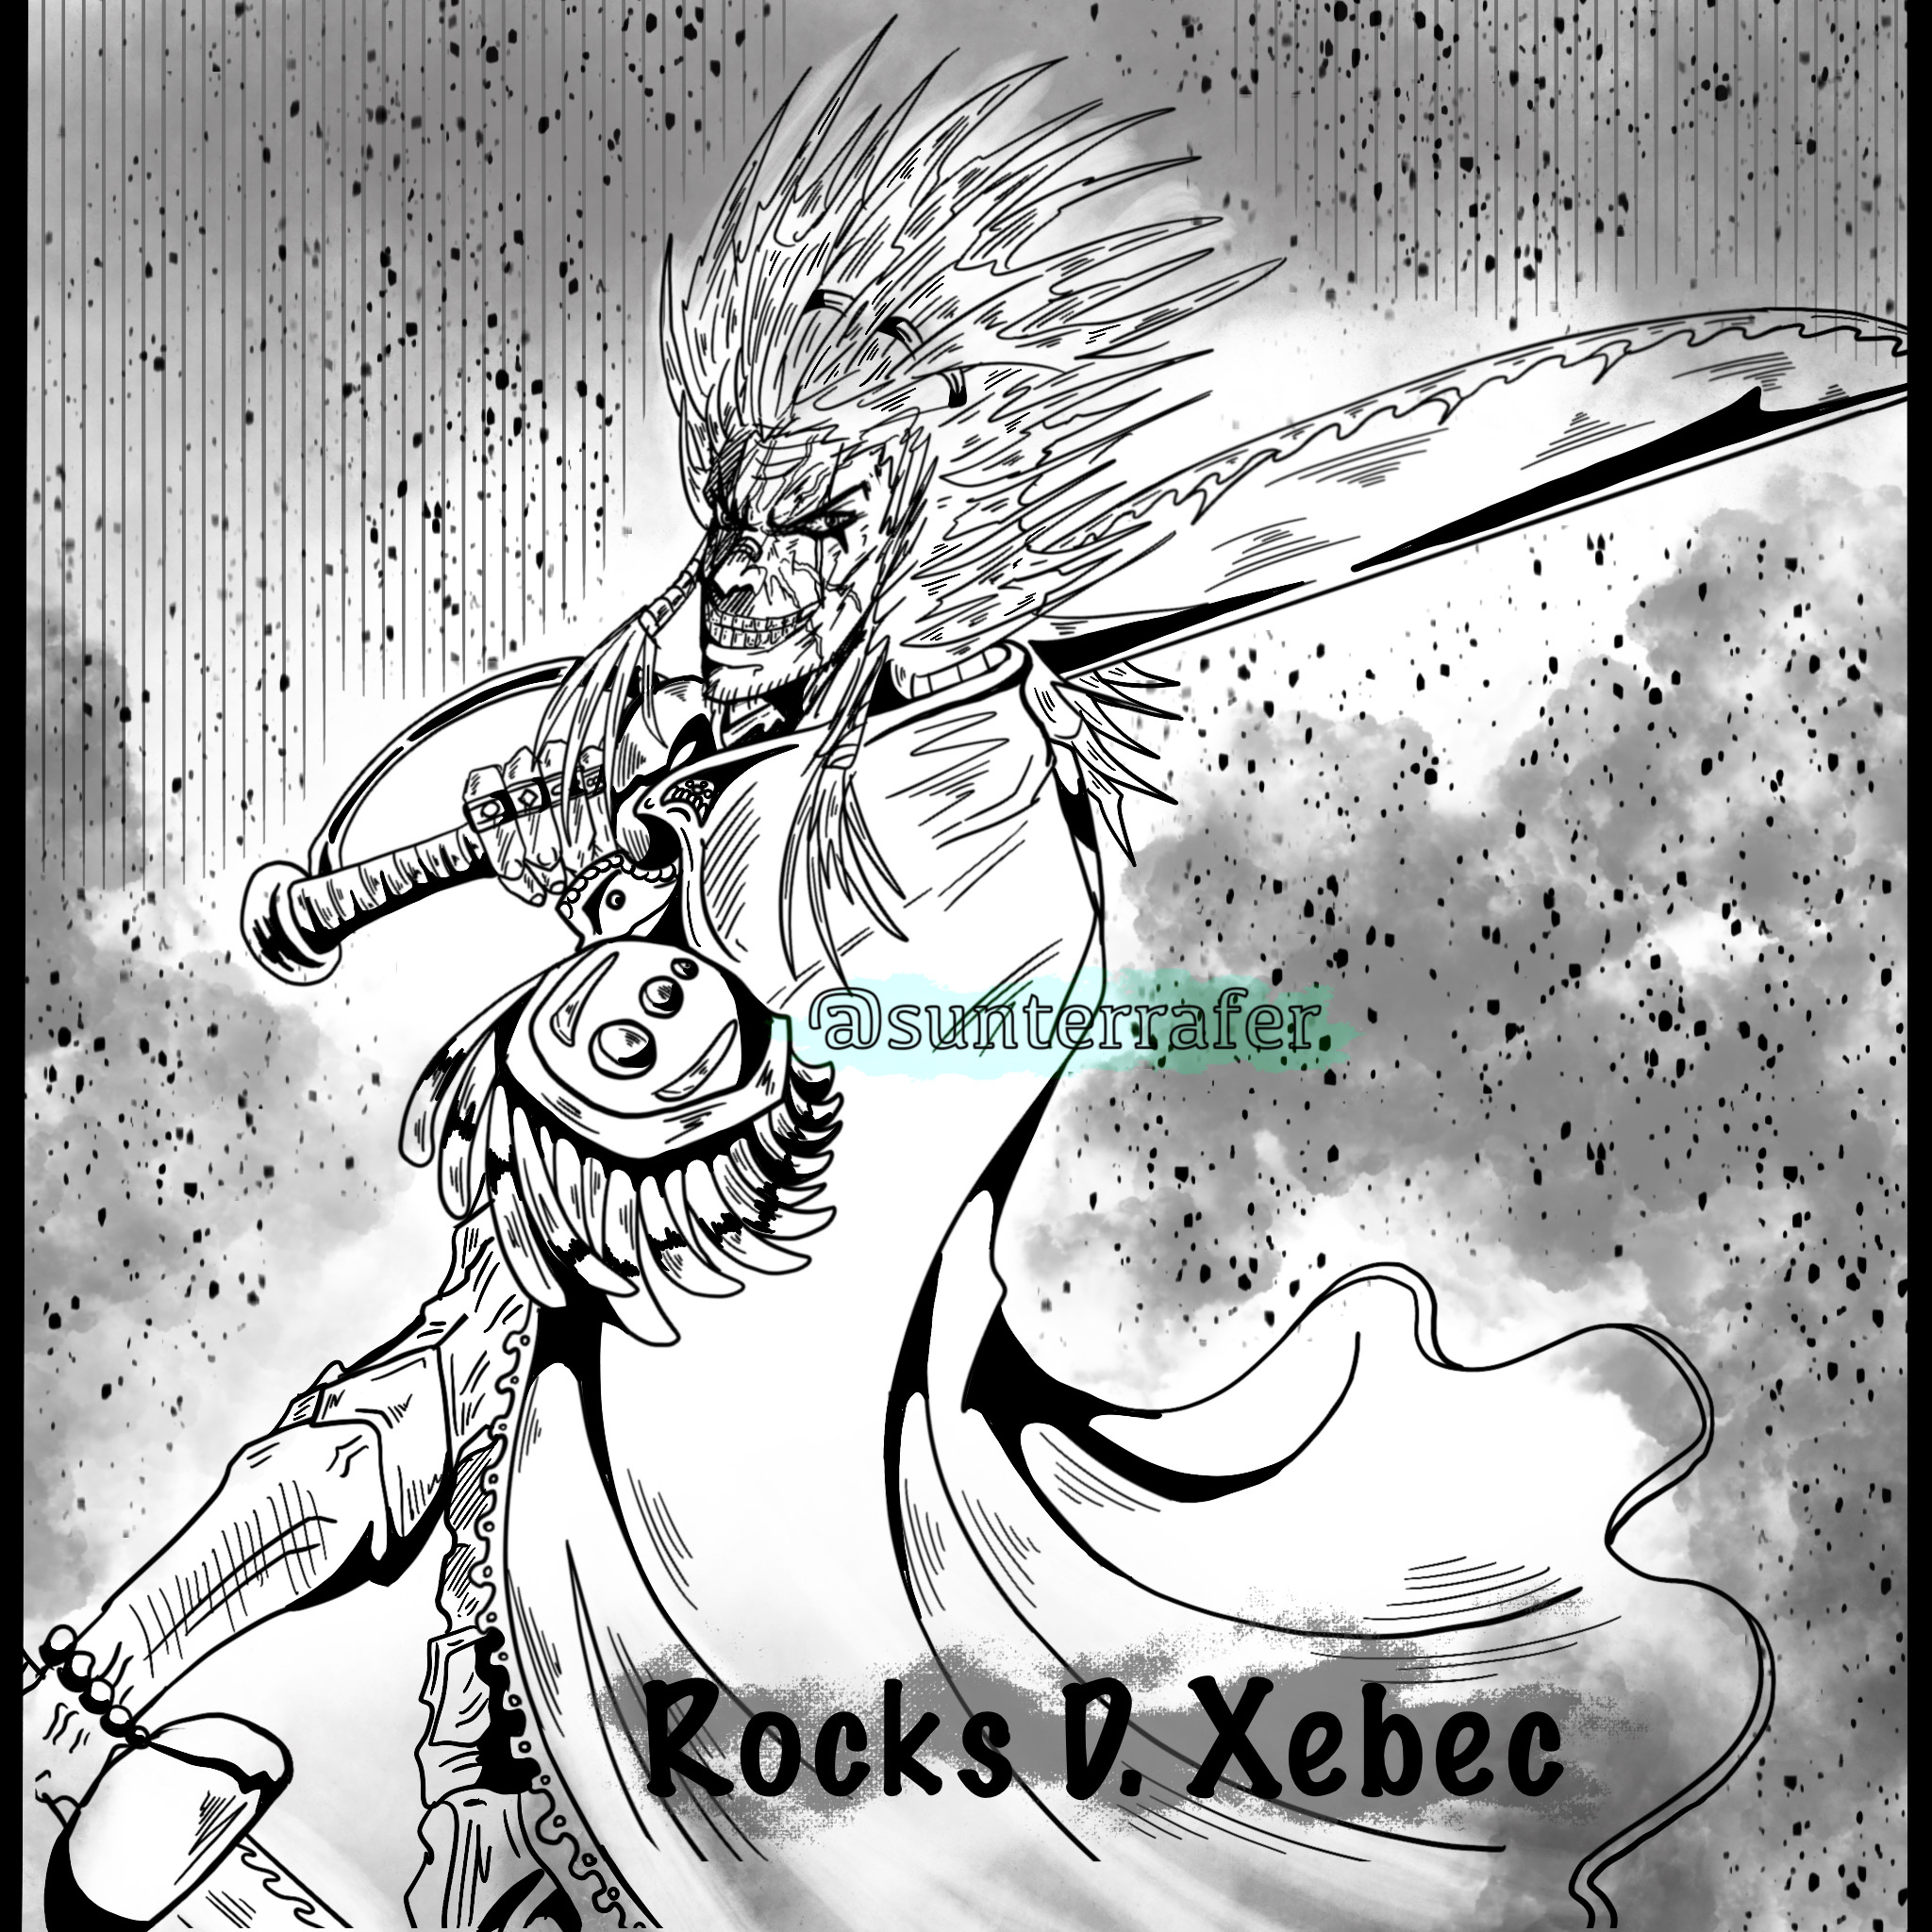 Rocks D. Xebec sketch by me : r/OnePiece